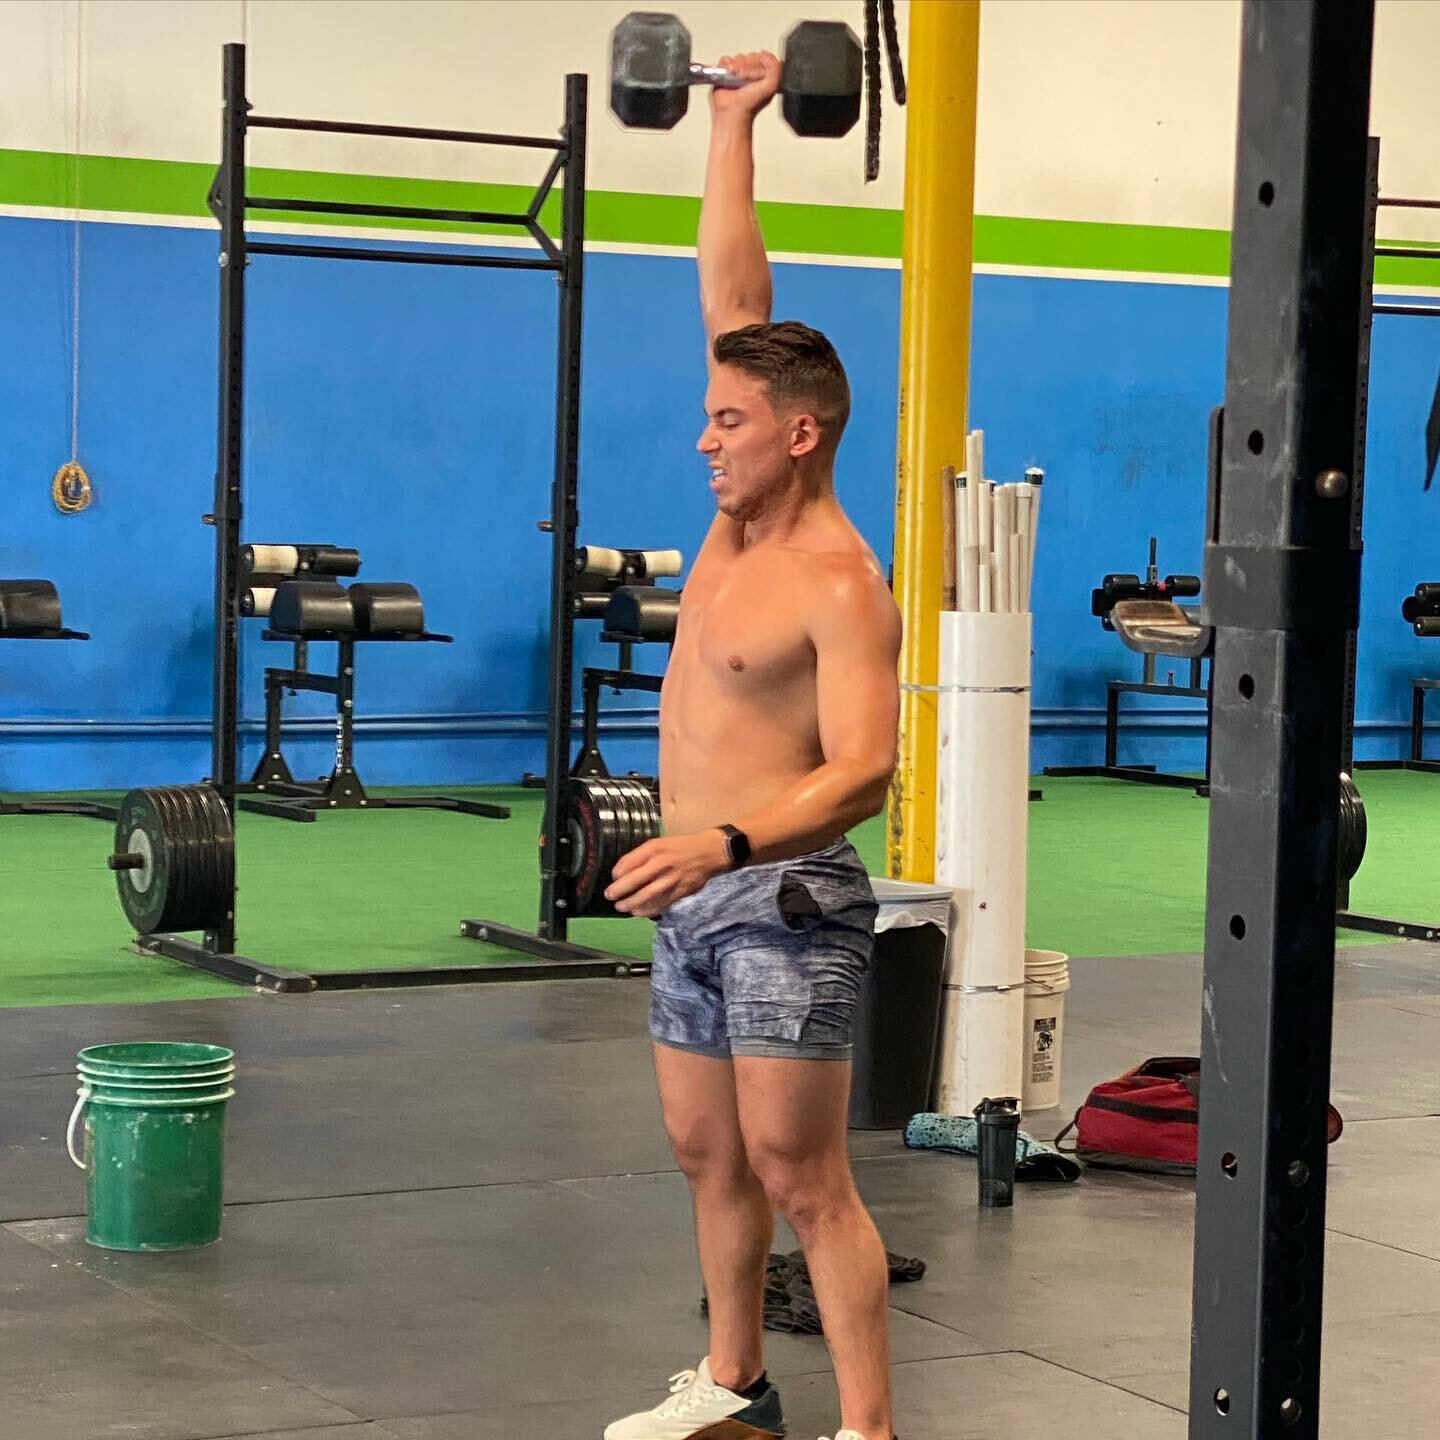 ALL ABOARD THE PAIN TRAIN
Aug 19 
Written By Resolution CrossFit
PERFORMANCE 

Six rounds each for time (Each Partner does 1 round while the other rests):
10 Wall Balls 30#/20#
20 Pull Ups
10 Burpee 2 Box Jump 24&quot;/20&quot;
20/15 cal Row 

INTERM